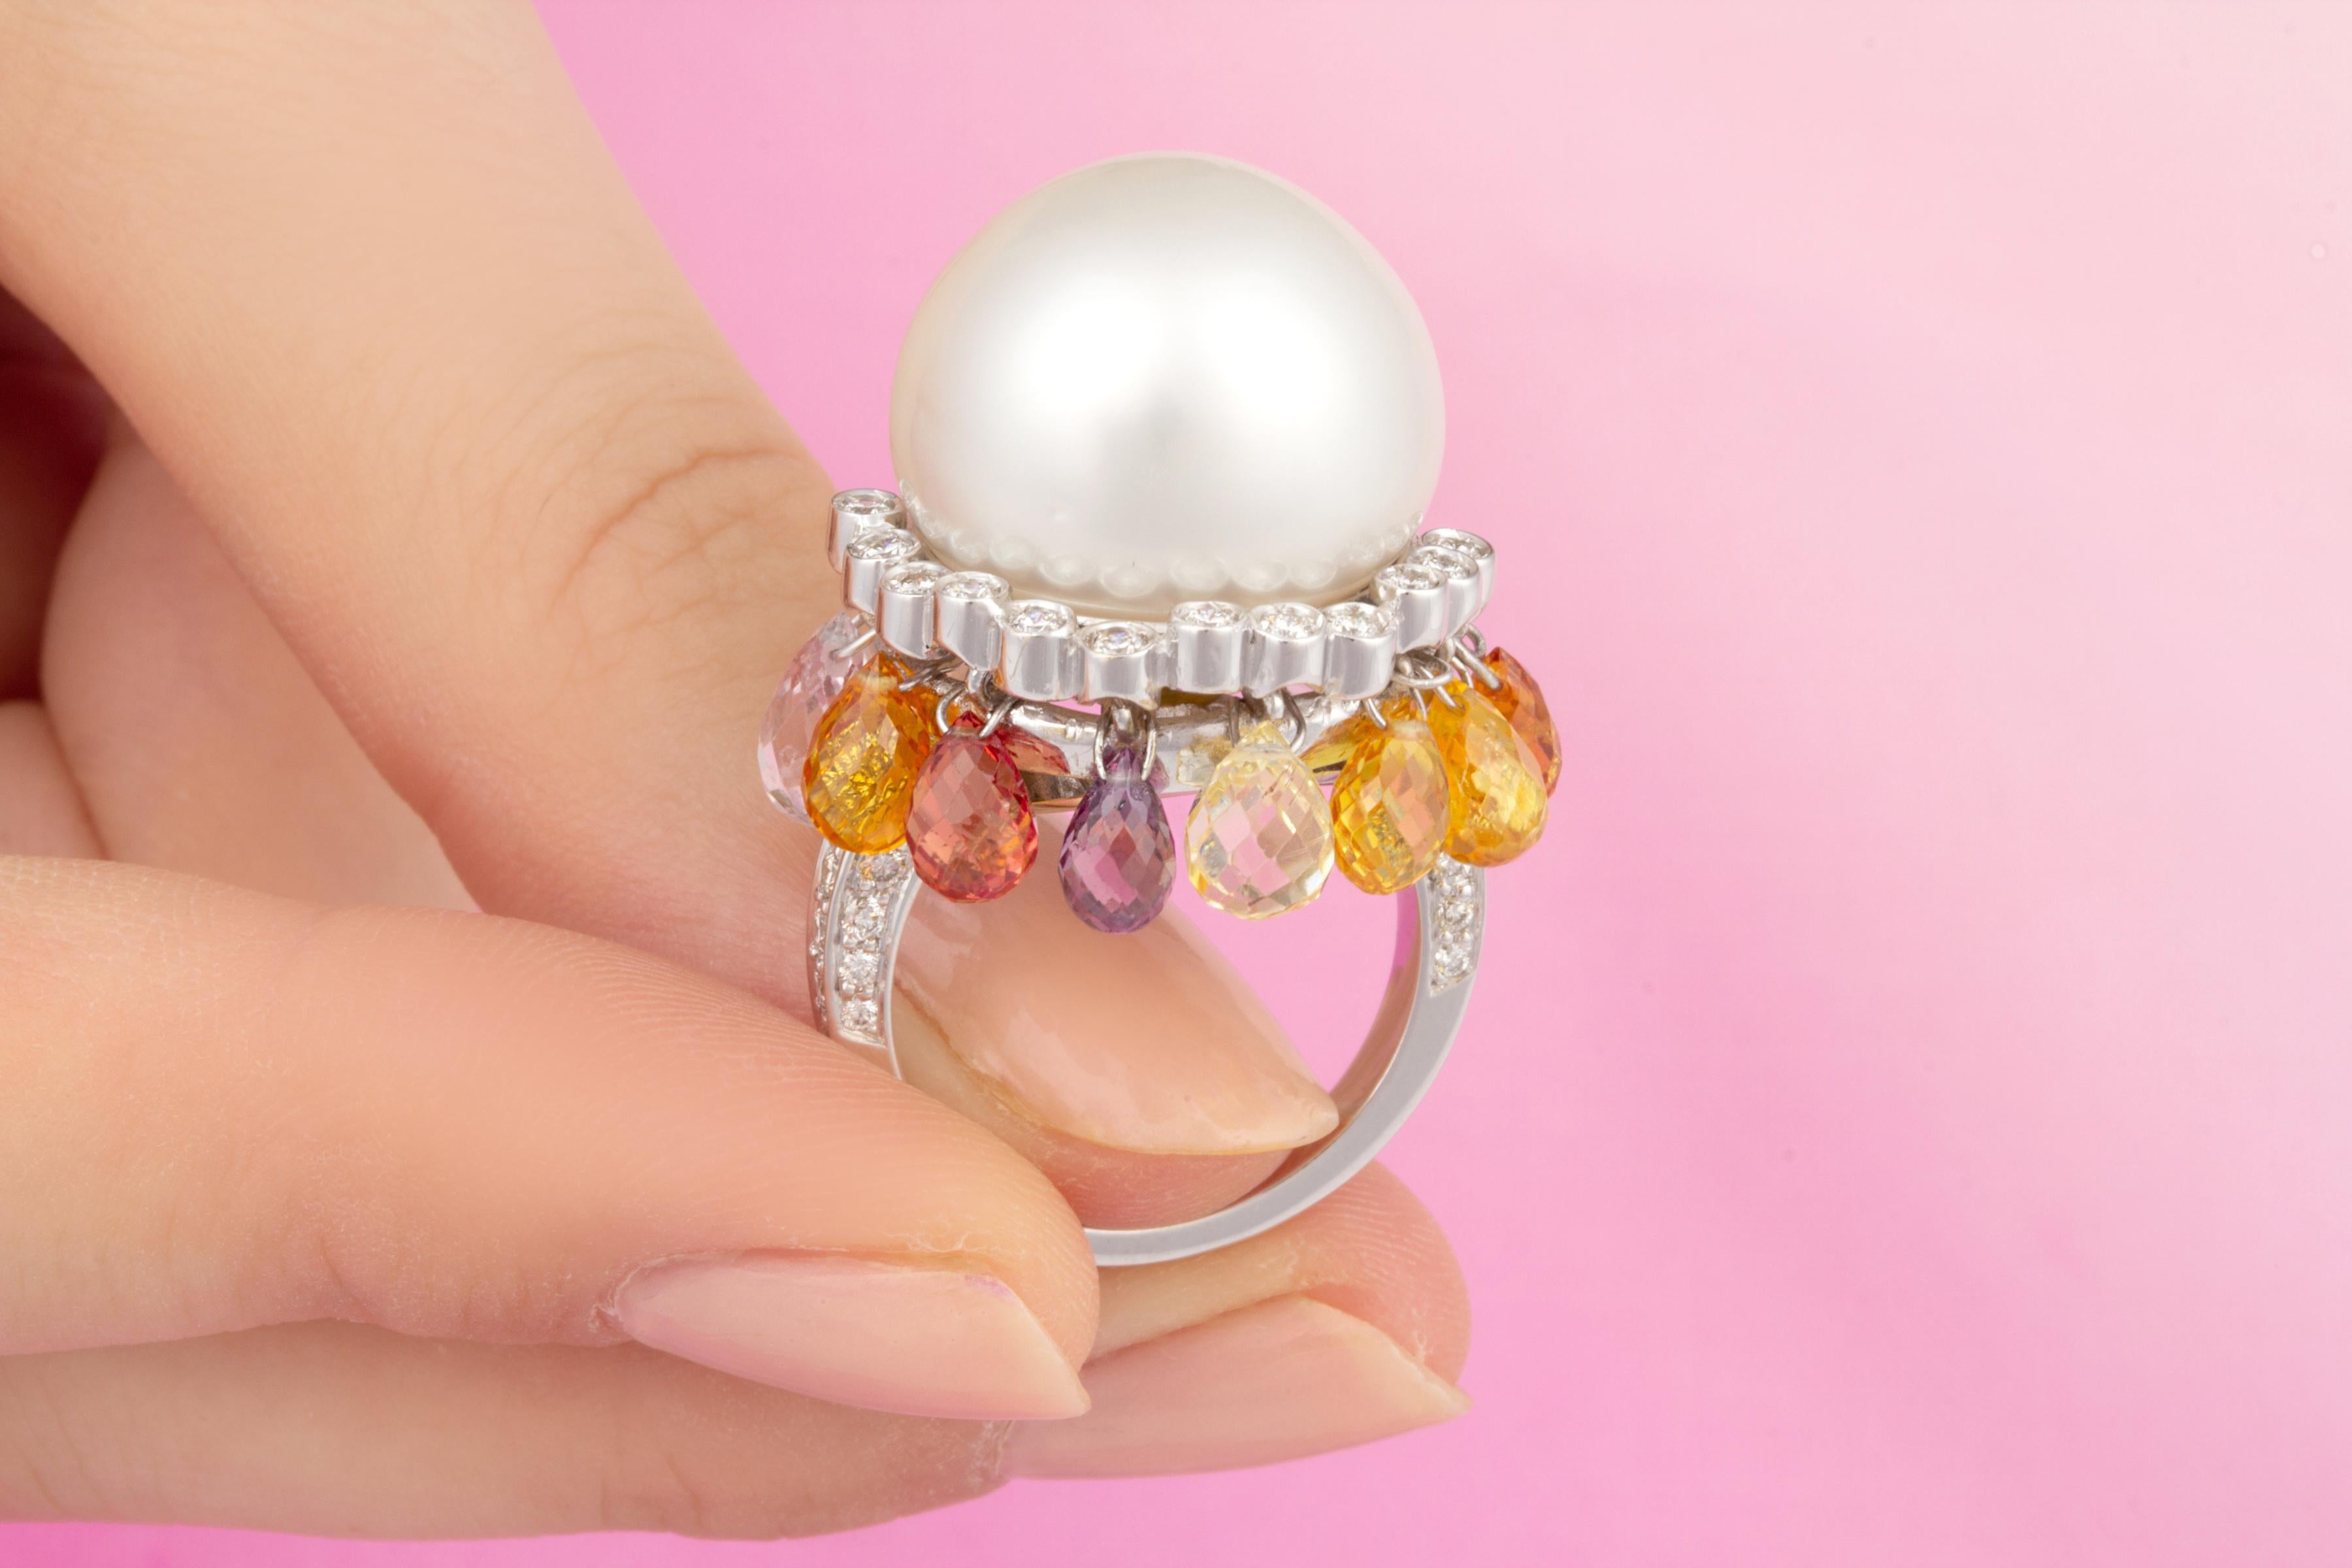 Briolette Cut Ella Gafter 17mm South Sea Pearl Diamond Cocktail Ring  For Sale